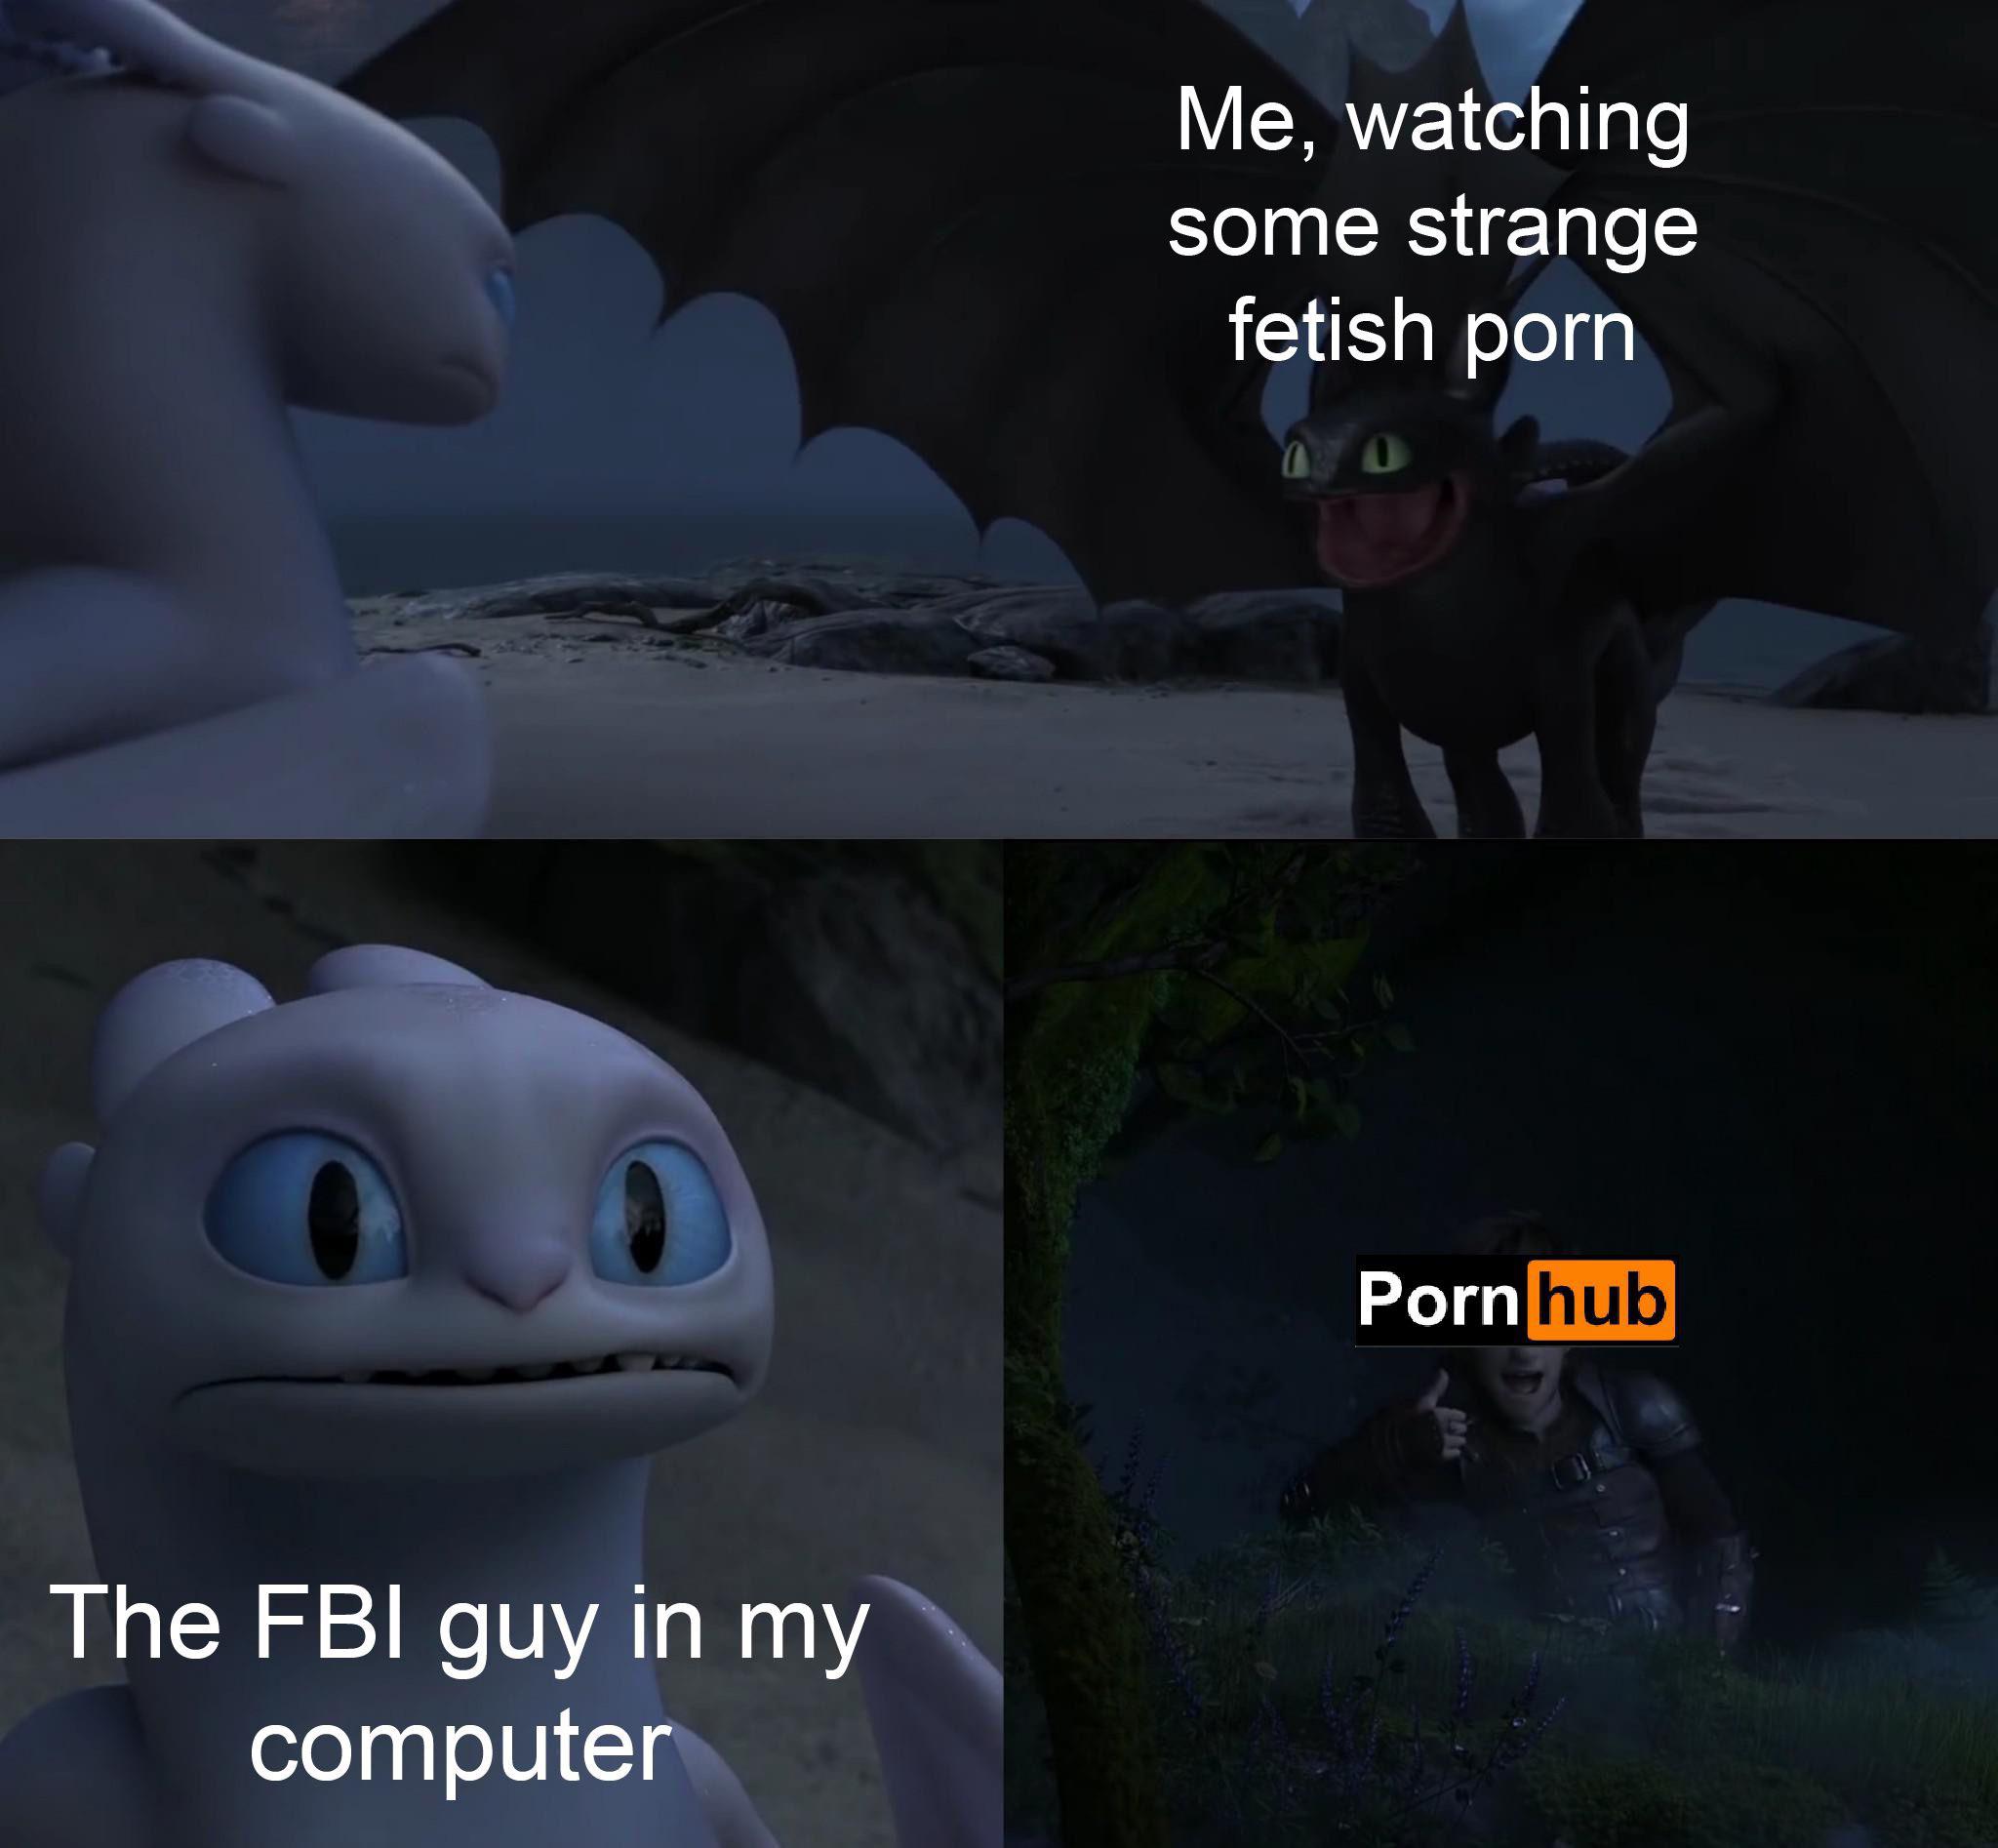 toothless how to train your dragon meme about screenshot - Me, watching some strange fetish porn Porn hub The Fbi guy in my computer